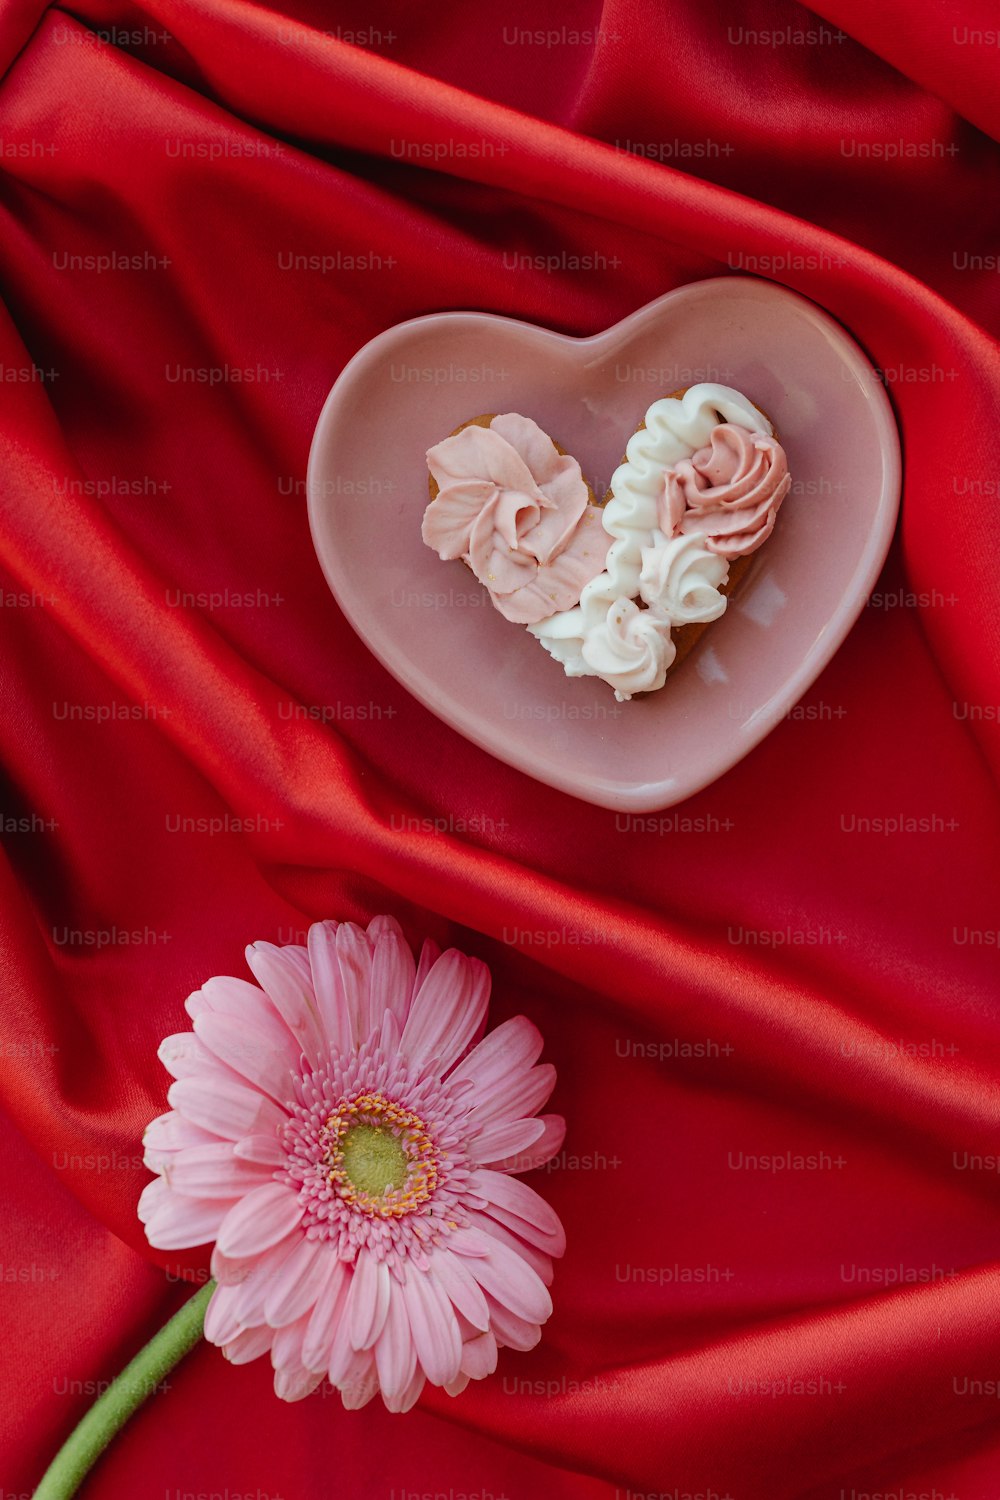 a pink flower and a heart shaped cookie on a red cloth